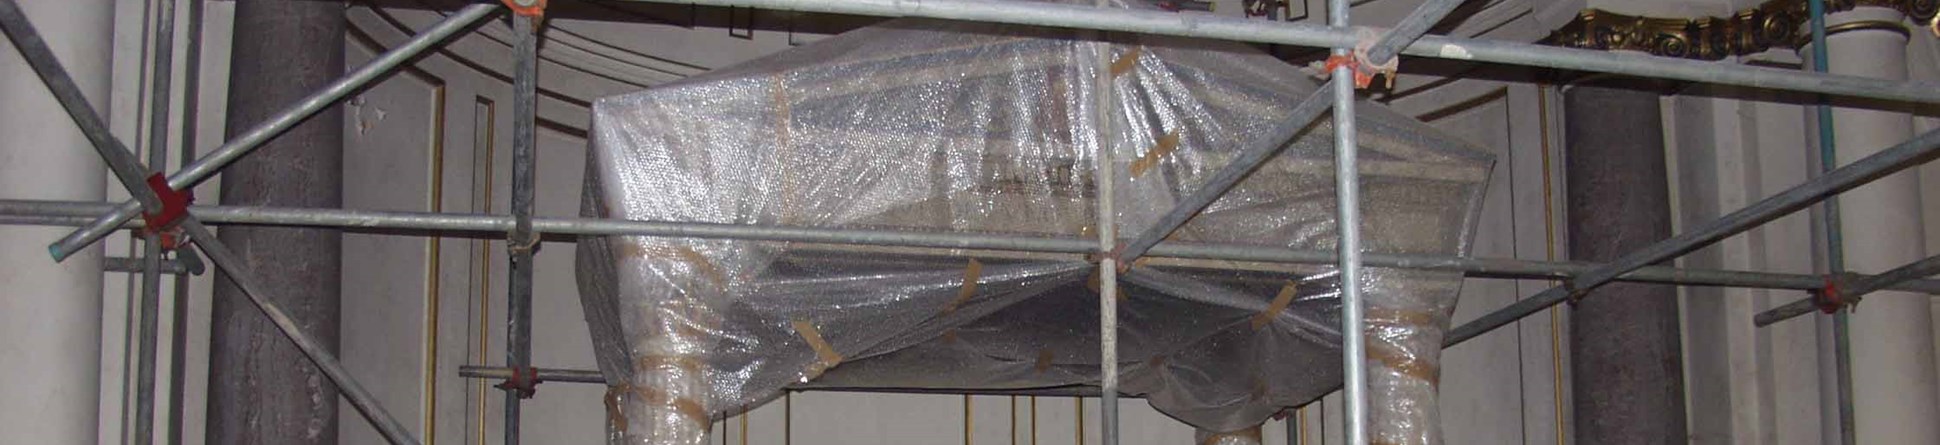 A baldaquin covered in bubble-wrap, flanked by two columns and surrounded by scaffolding.